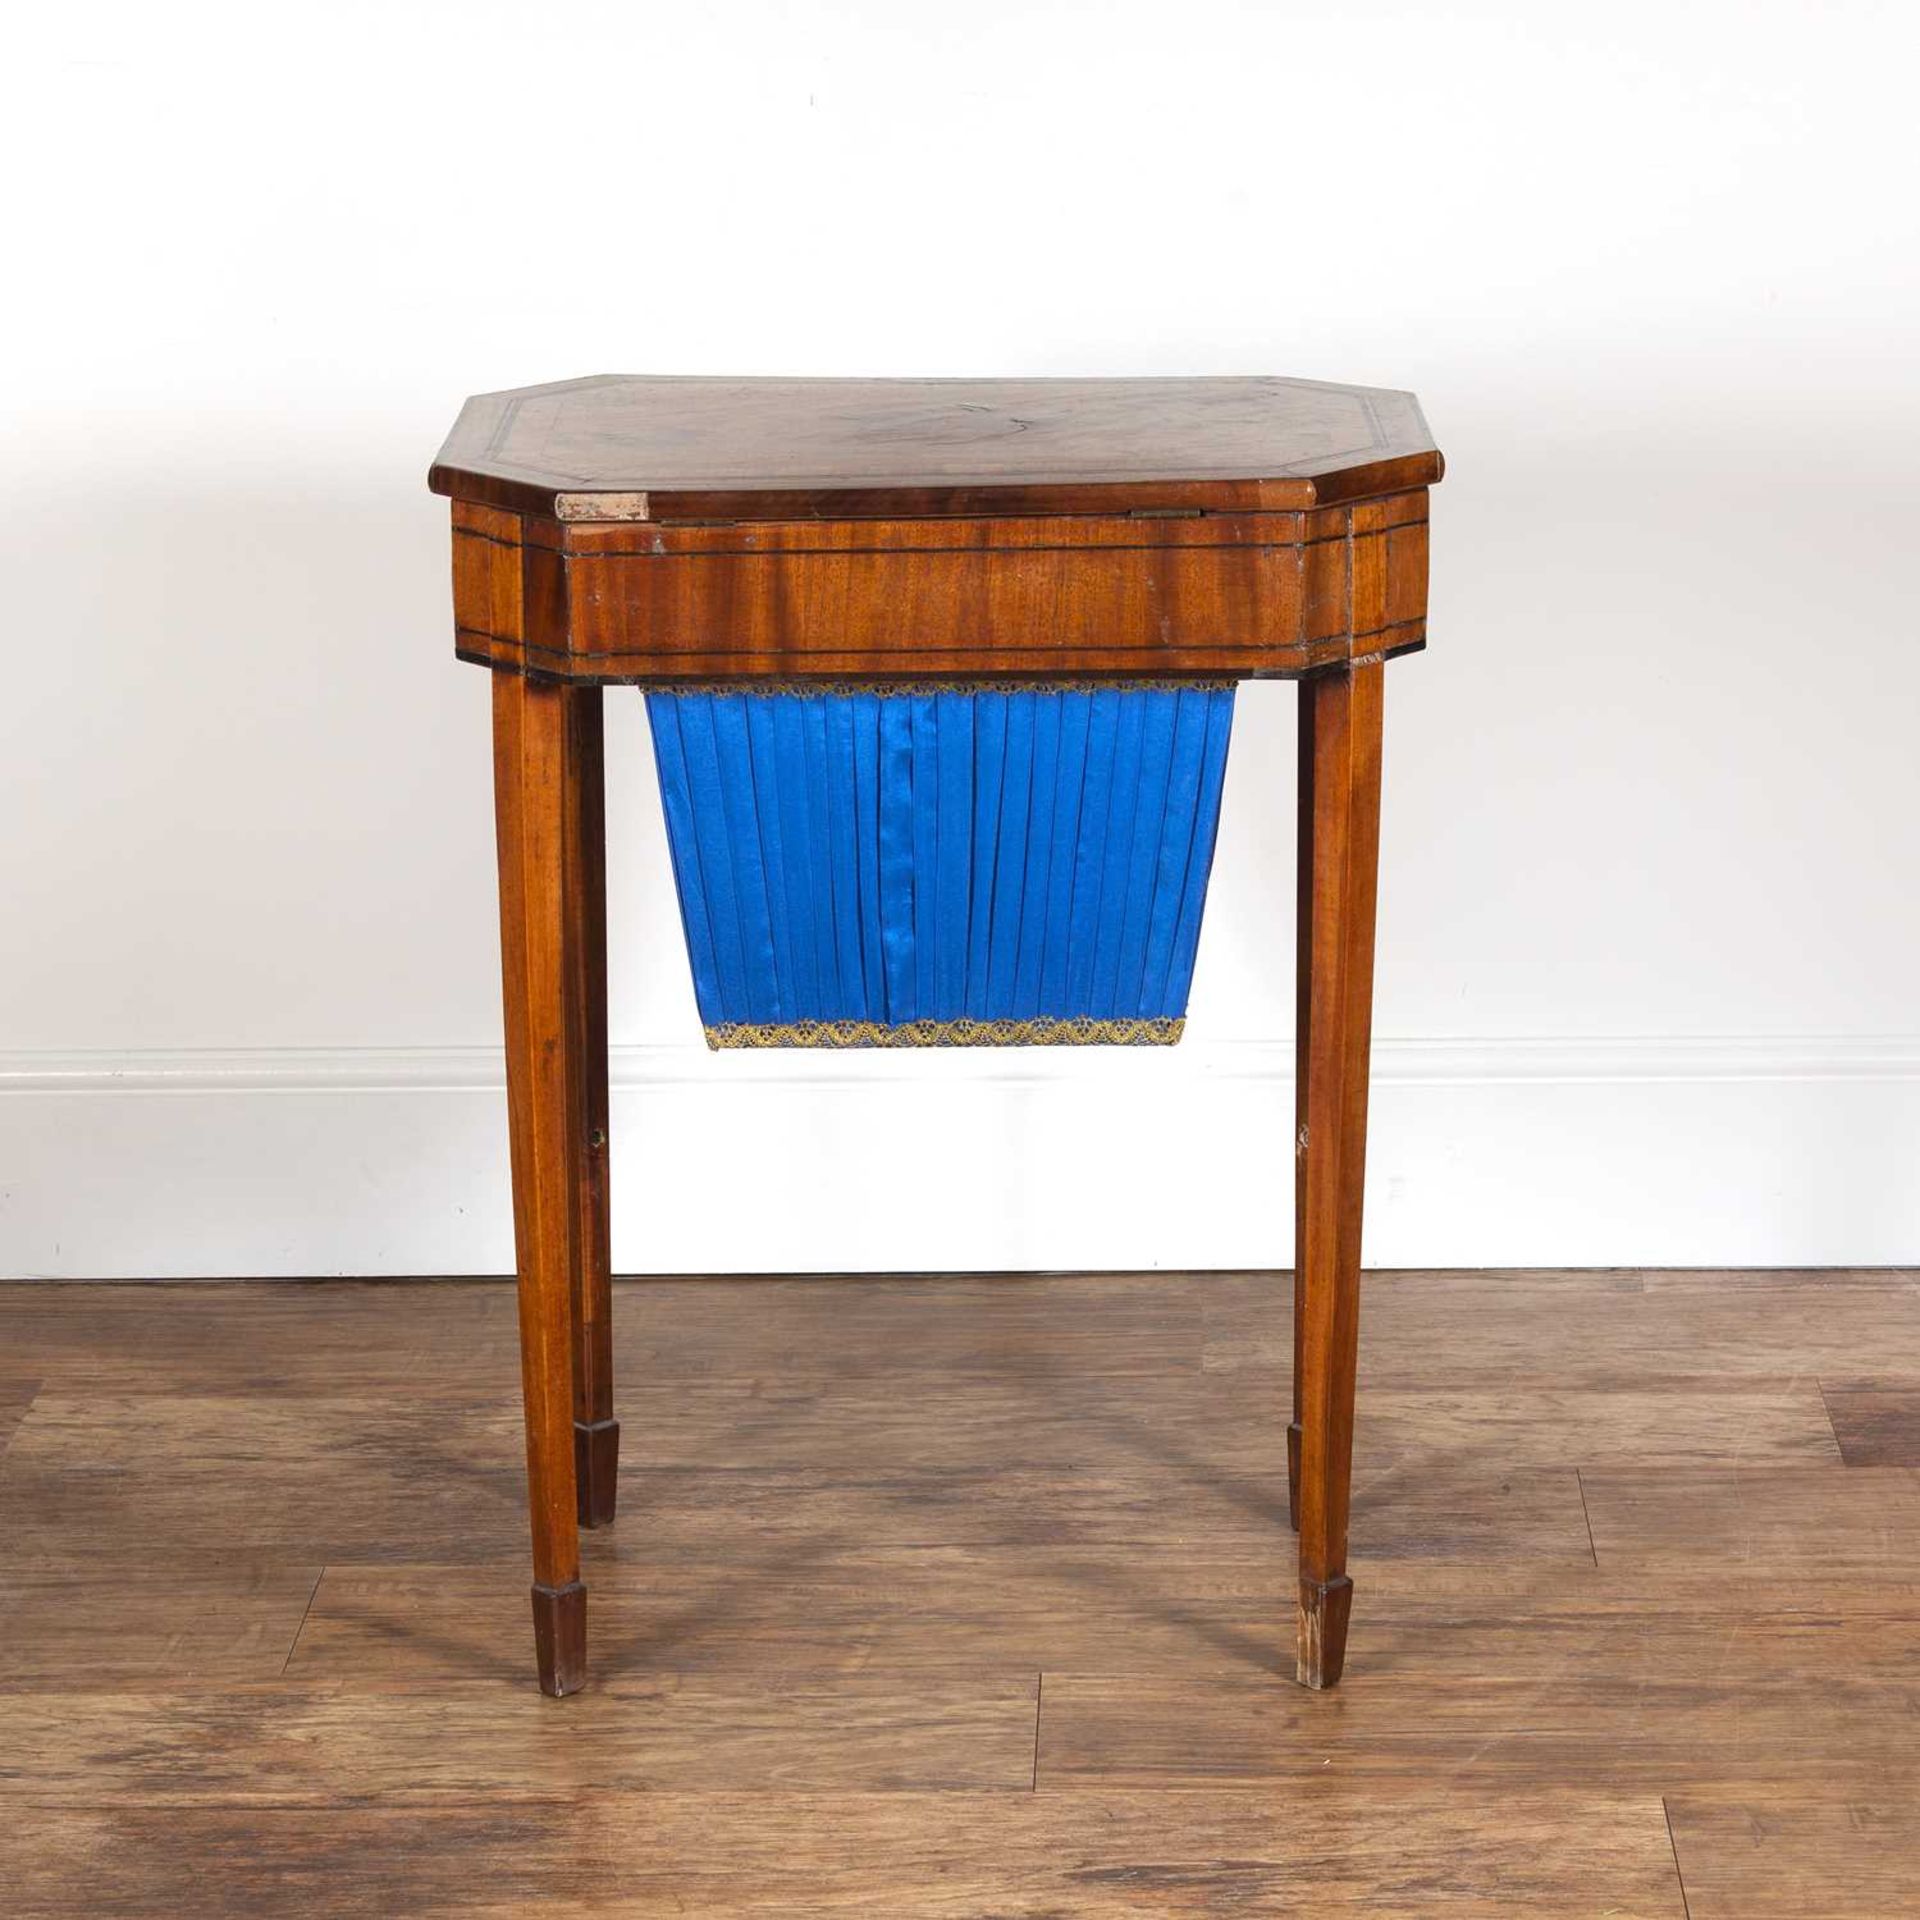 Mahogany sewing table 19th Century, a lift up lid revealing a fitted interior, above a pull-out - Image 4 of 7